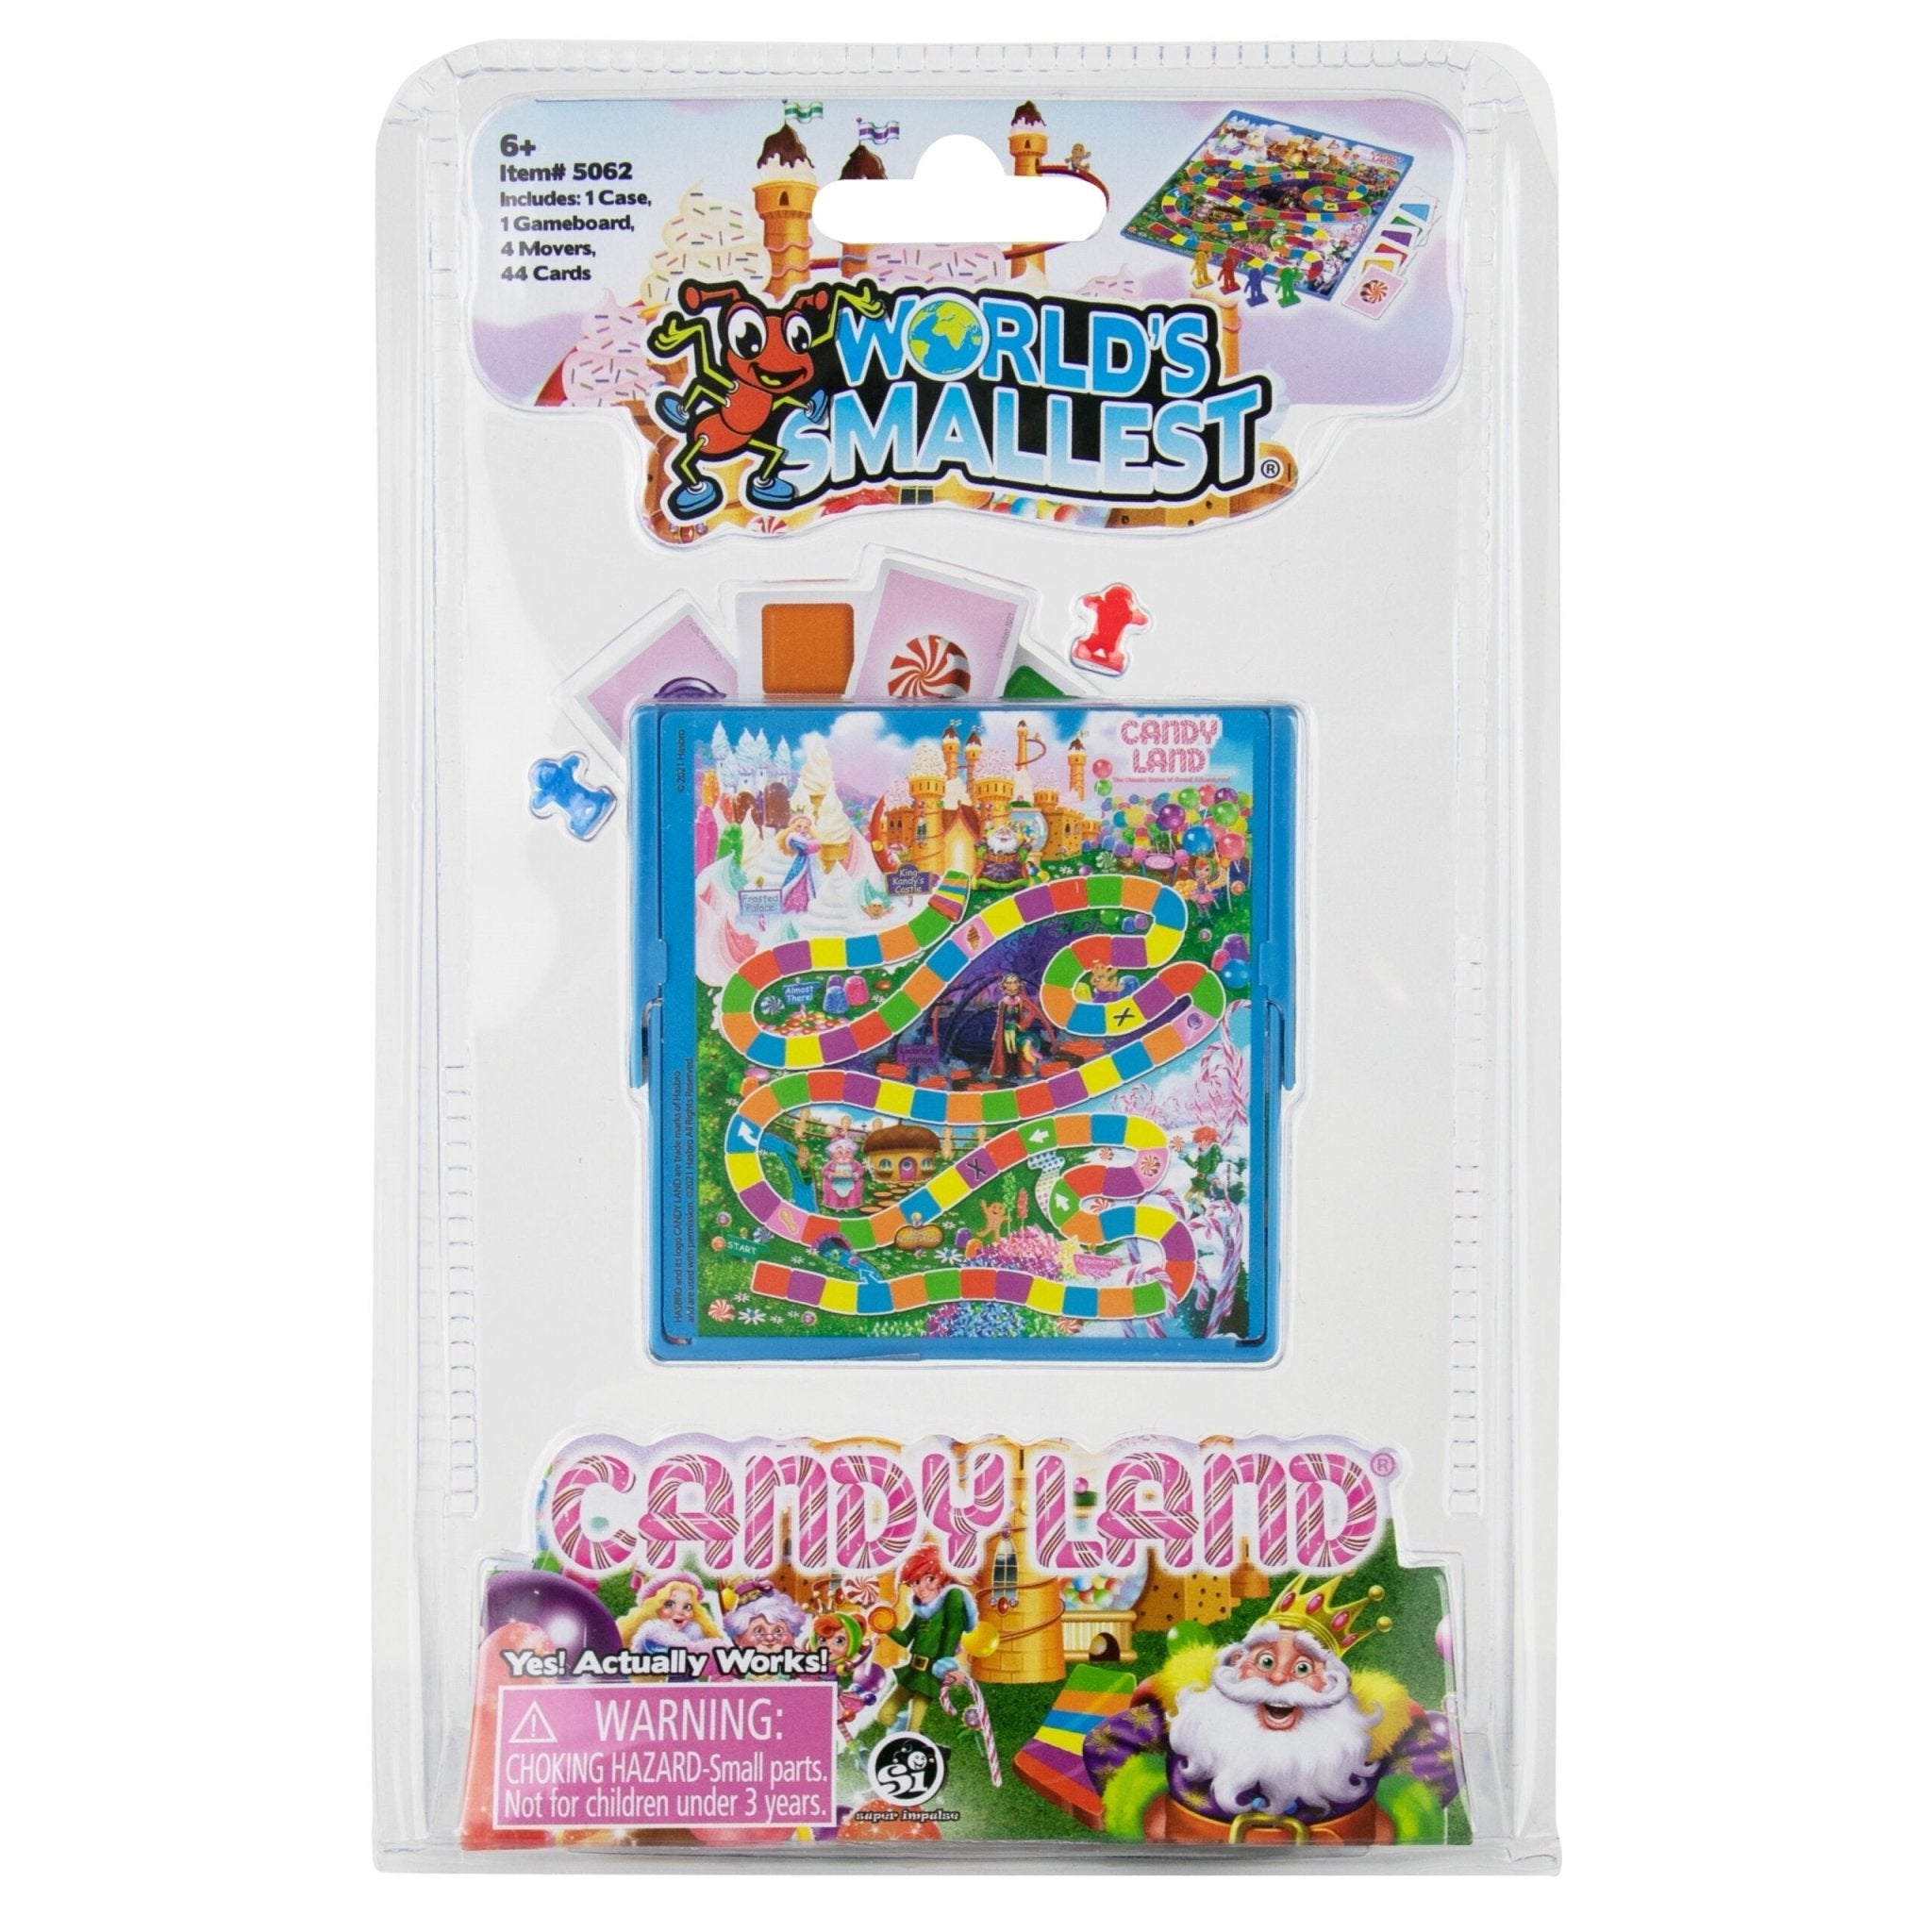 World's Smallest Candyland Board Game